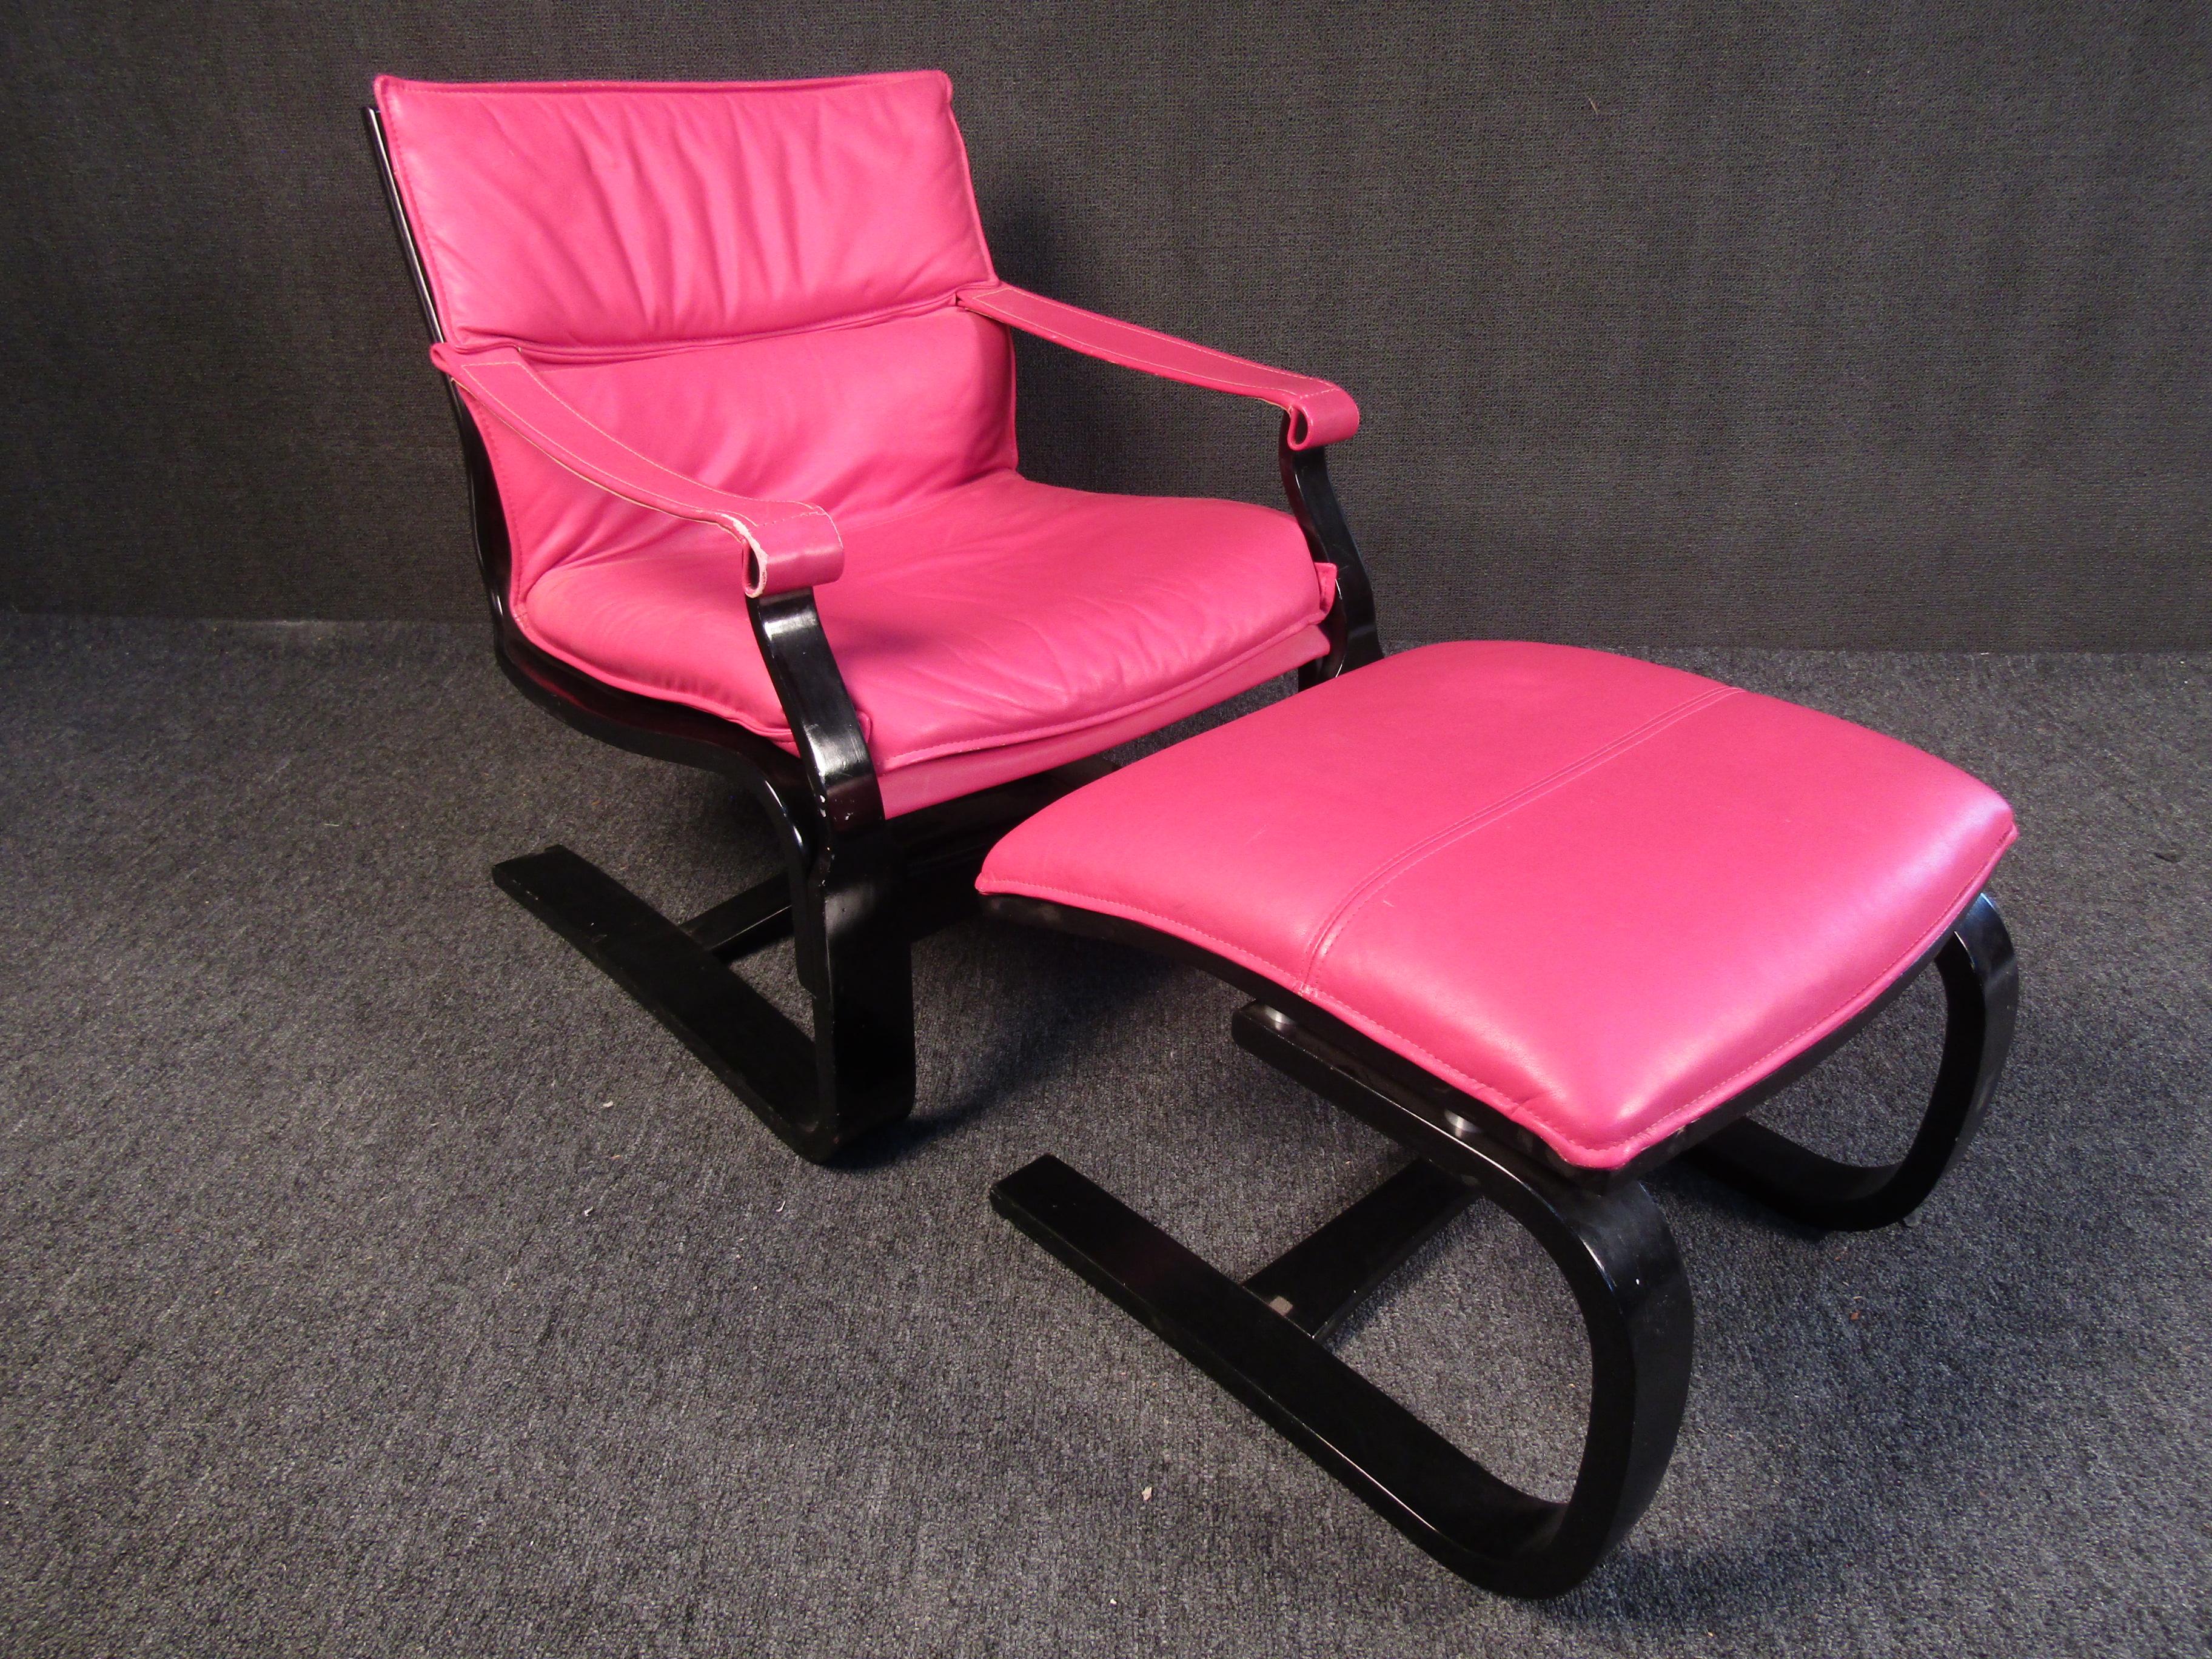 This vintage lounge chair and ottoman set is full of bold Mid-Century Modern style. Vibrant pink leather contrasts with a black wooden frame making this set as eye-catching as it is comfortable. Please confirm item location with seller (NY/NJ).